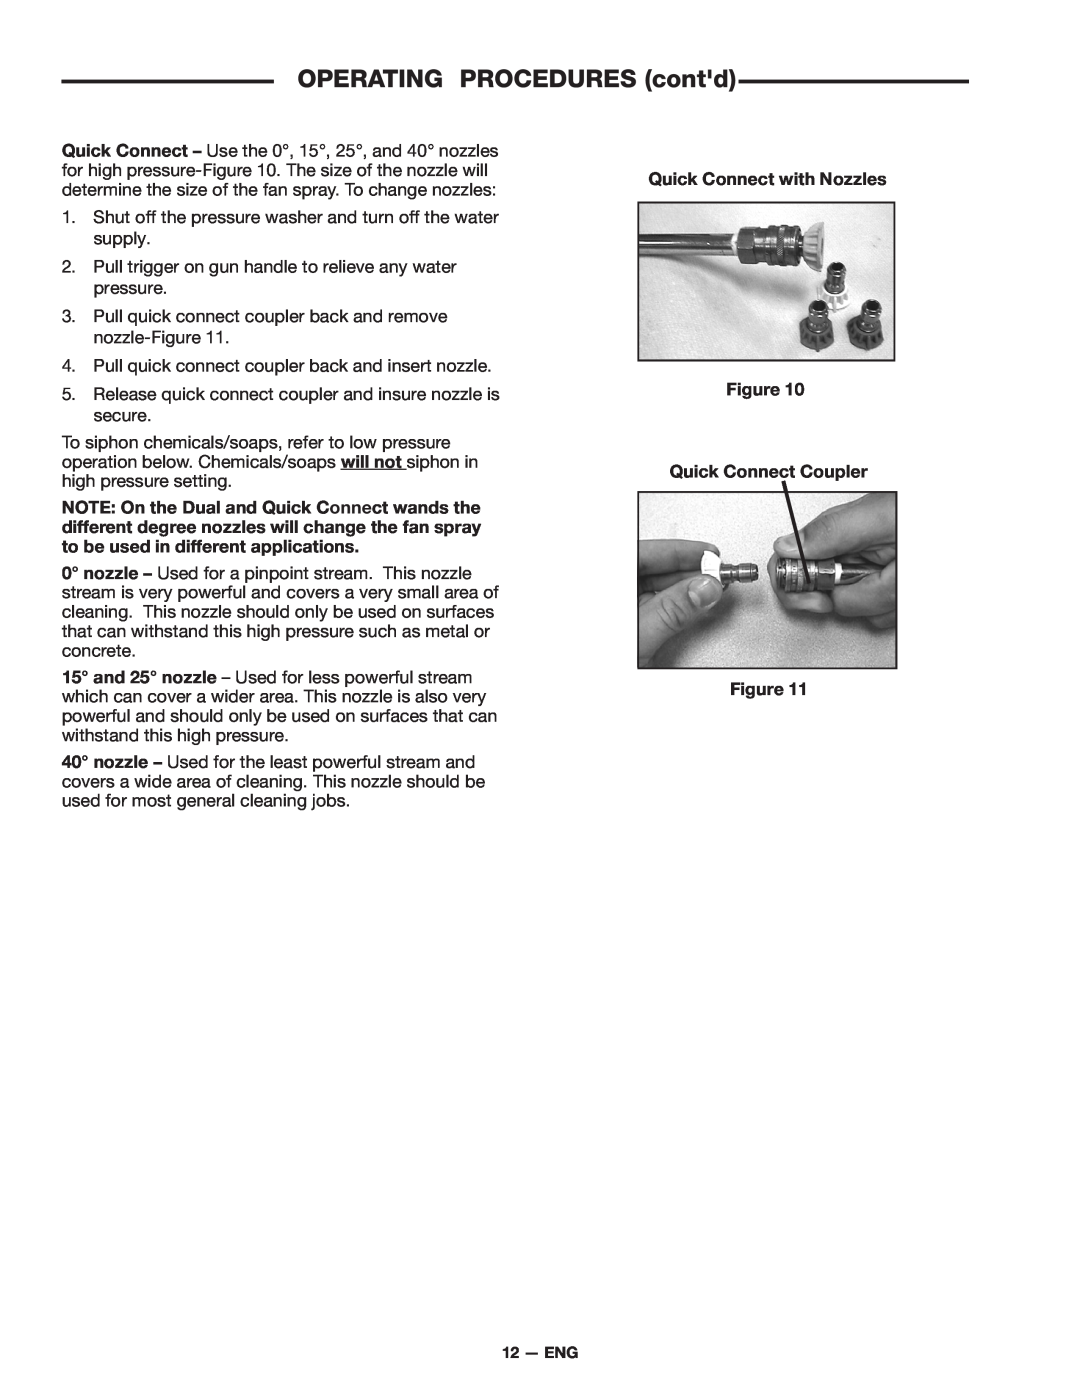 DeVillbiss Air Power Company D21684 OPERATING PROCEDURES contd, Quick Connect with Nozzles, Quick Connect Coupler, Eng 